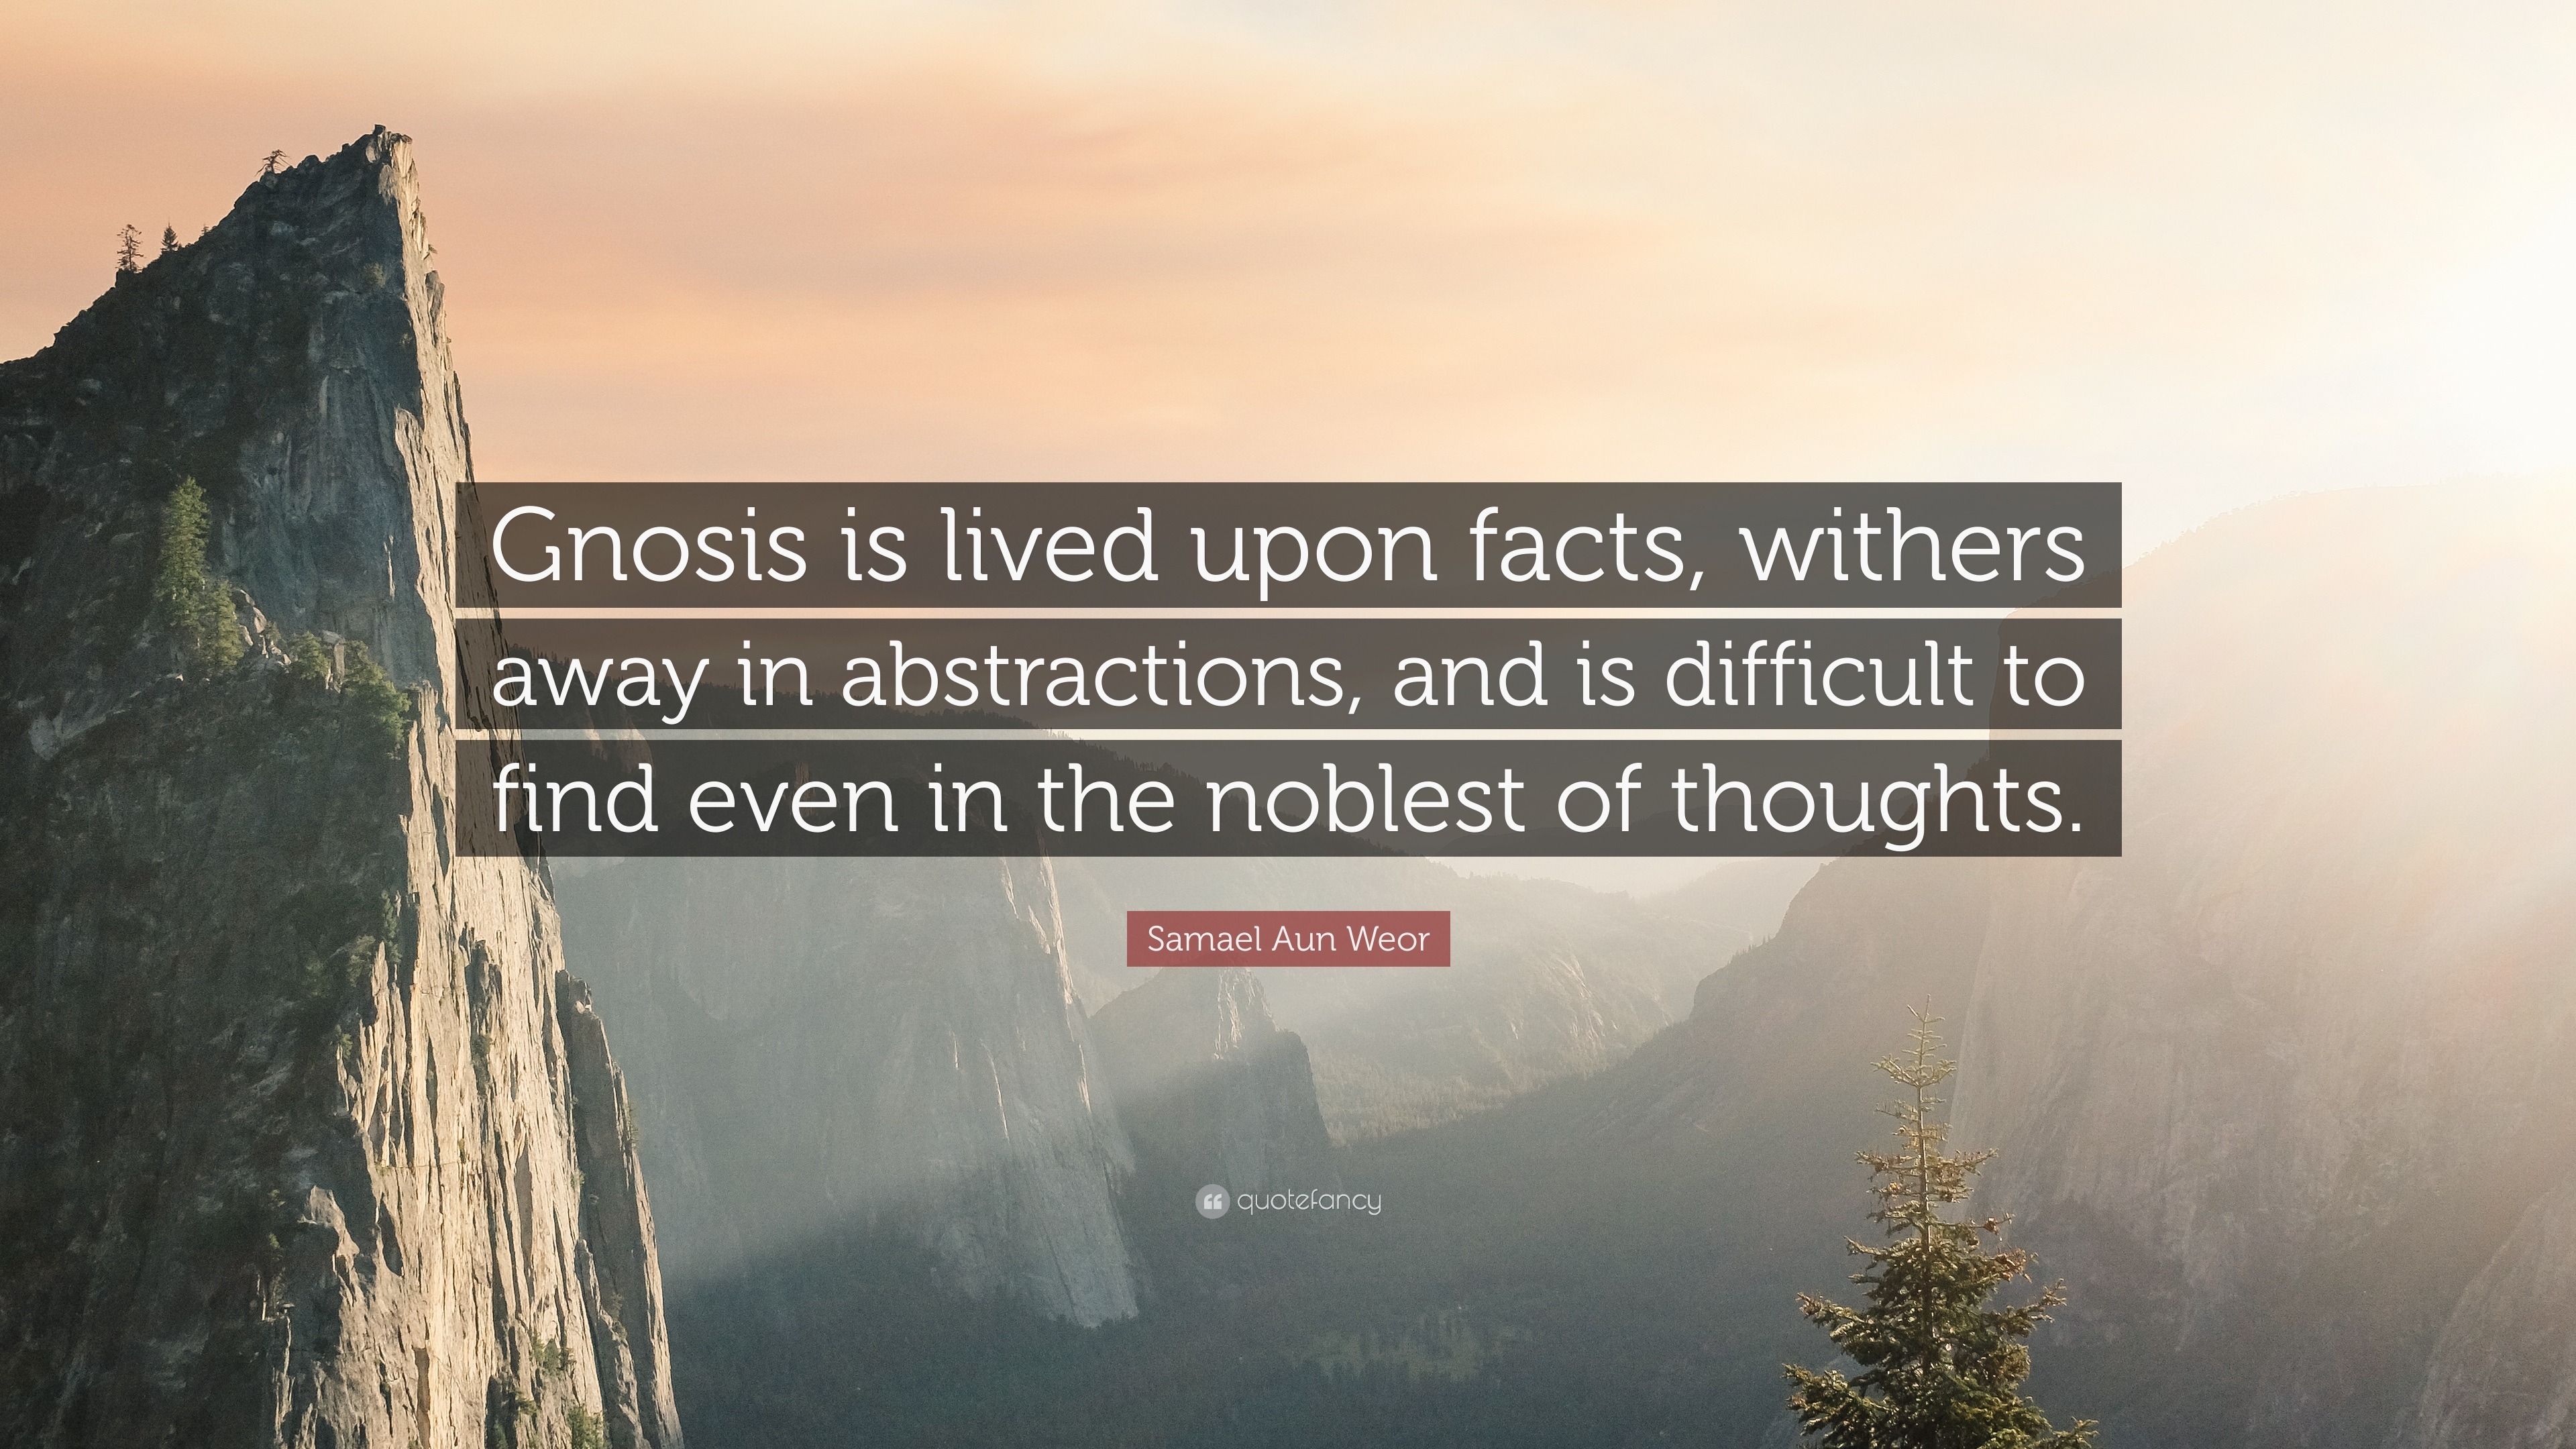 Samael Aun Weor Quote: “Gnosis is lived upon facts, withers away in abstractions, and is difficult